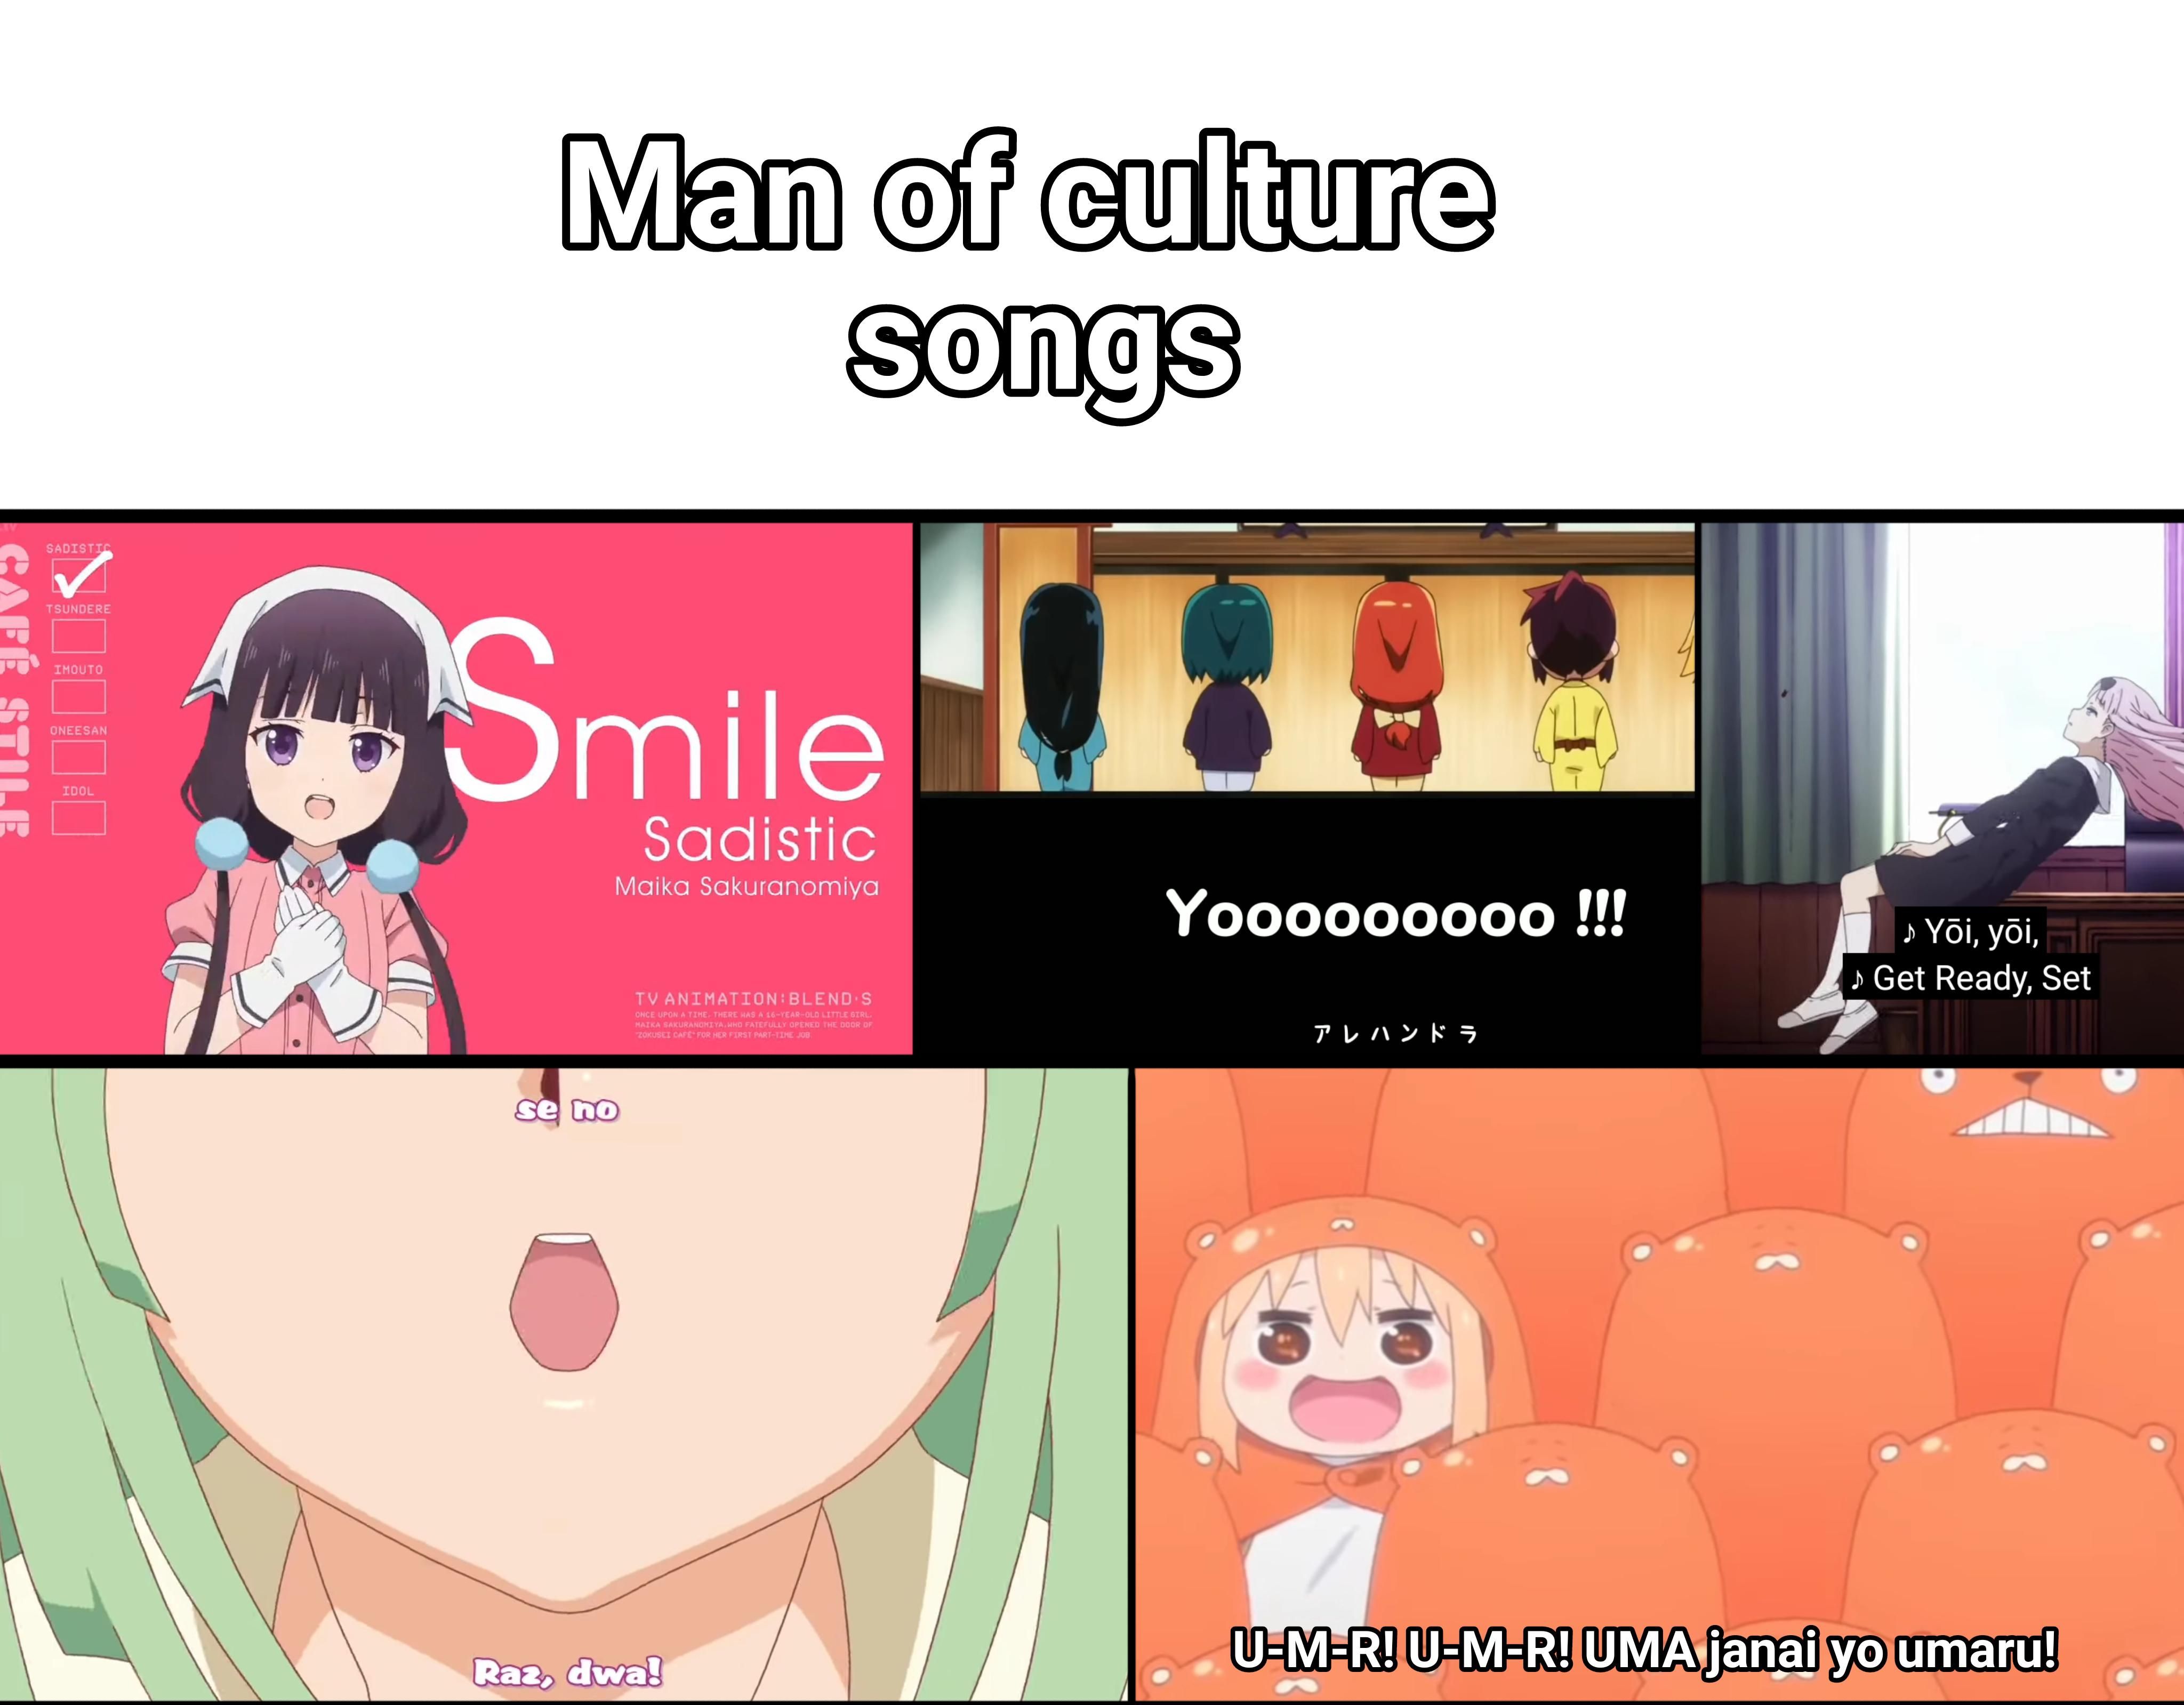 Let's sing some Man of culture songs!!!!!